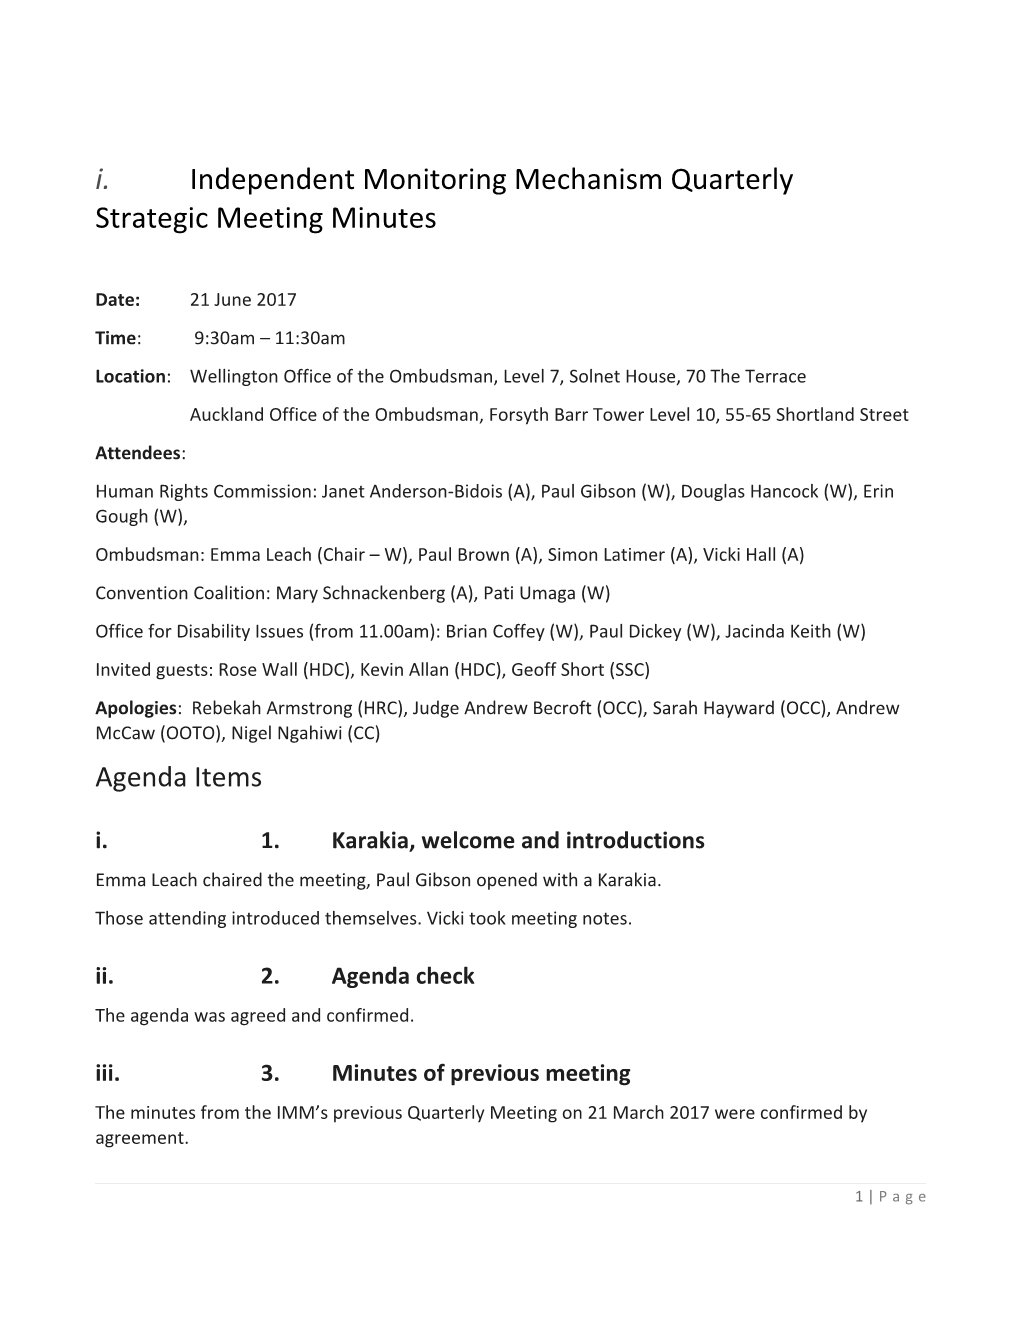 Independent Monitoring Mechanism Quarterly Strategic Meeting Minutes